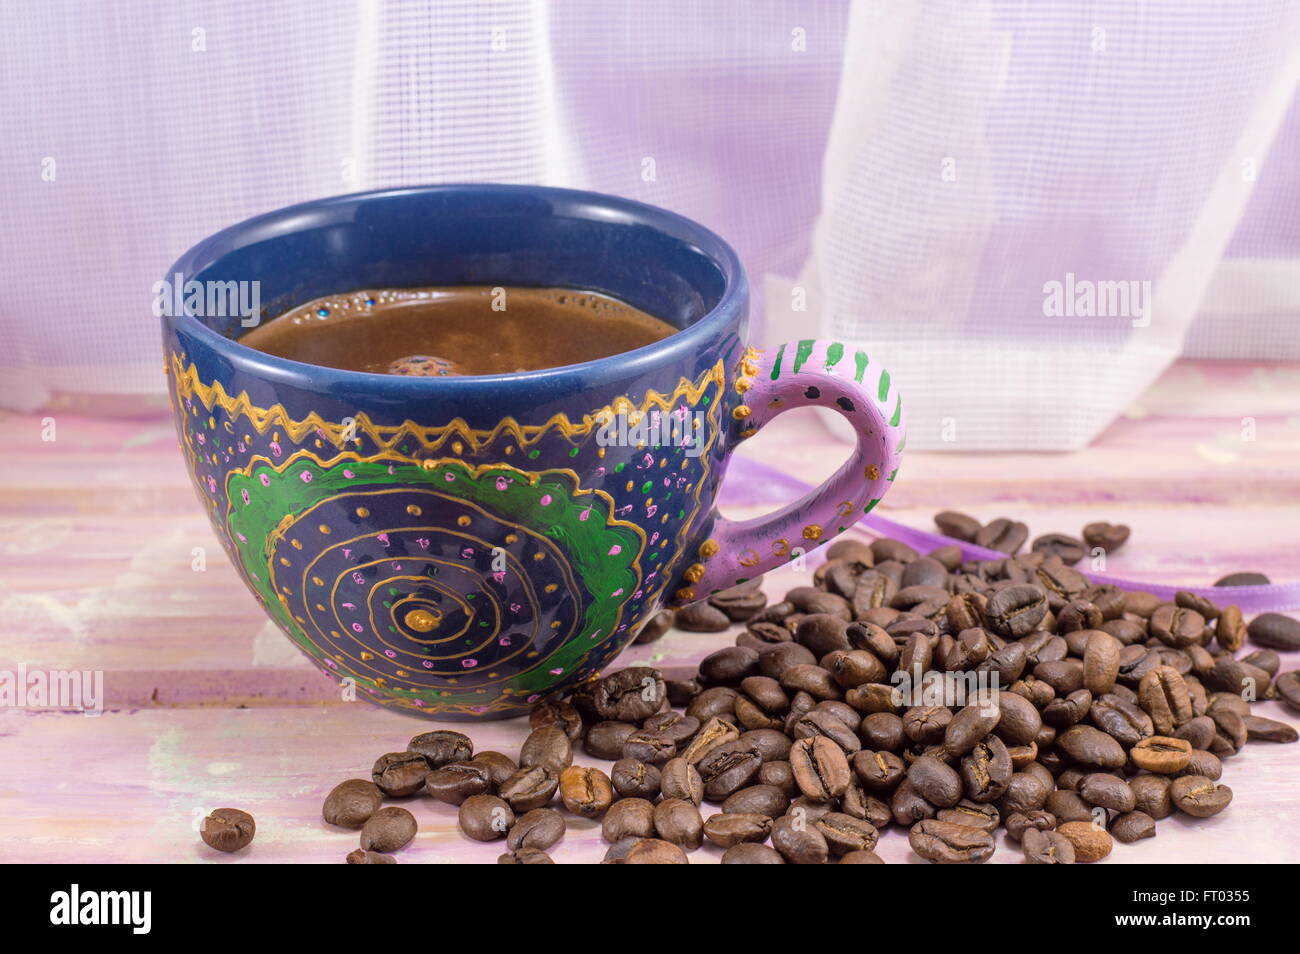 Coffee cup and coffee  beans on a wooden table Stock Photo